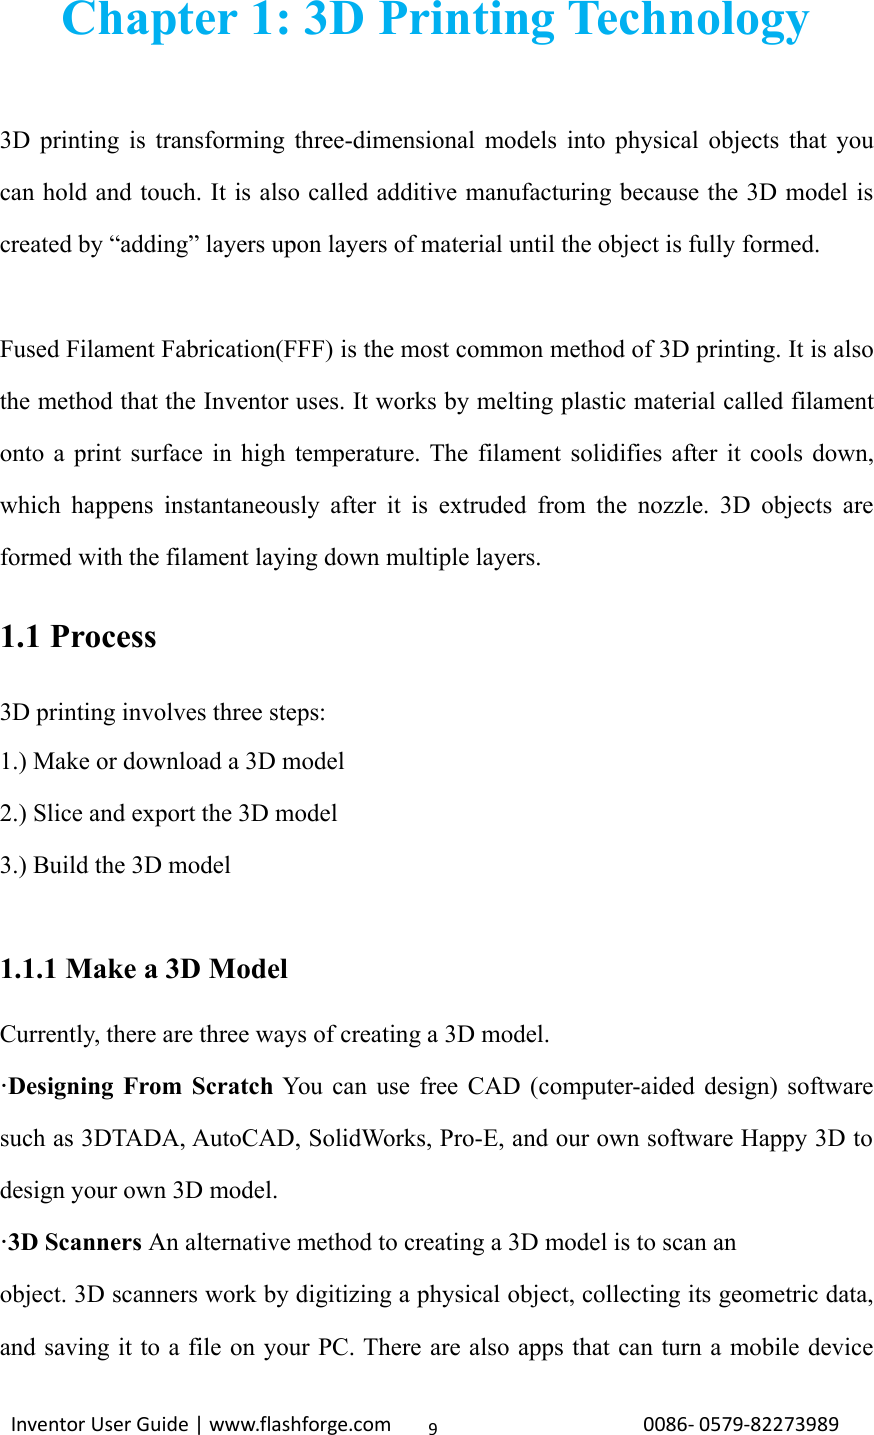 Inventor User Guide | www.flashforge.com 0086‐0579‐822739899Chapter 1: 3D Printing Technology3D printing is transforming three-dimensional models into physical objects that youcan hold and touch. It is also called additive manufacturing because the 3D model iscreated by “adding” layers upon layers of material until the object is fully formed.Fused Filament Fabrication(FFF) is the most common method of 3D printing. It is alsothe method that the Inventor uses. It works by melting plastic material called filamentonto a print surface in high temperature. The filament solidifies after it cools down,which happens instantaneously after it is extruded from the nozzle. 3D objects areformed with the filament laying down multiple layers.1.1 Process3D printing involves three steps:1.) Make or download a 3D model2.) Slice and export the 3D model3.) Build the 3D model1.1.1 Make a 3D ModelCurrently, there are three ways of creating a 3D model.·Designing From Scratch You can use free CAD (computer-aided design) softwaresuch as 3DTADA, AutoCAD, SolidWorks, Pro-E, and our own software Happy 3D todesign your own 3D model.·3D Scanners An alternative method to creating a 3D model is to scan anobject. 3D scanners work by digitizing a physical object, collecting its geometric data,and saving it to a file on your PC. There are also apps that can turn a mobile device